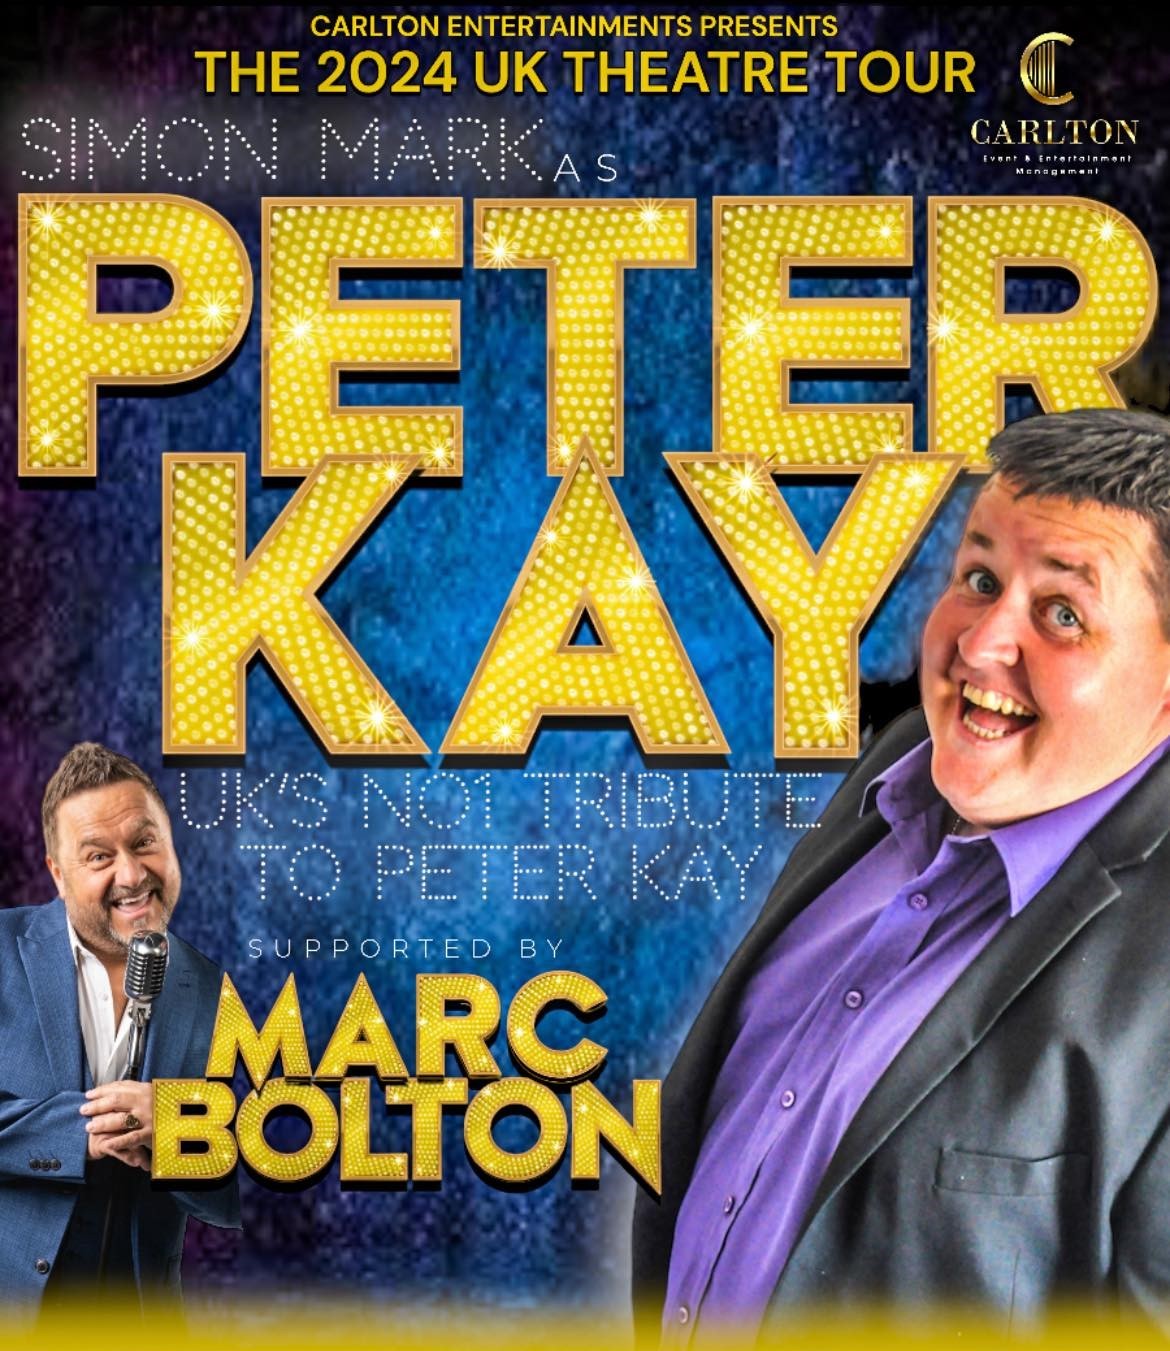 PETER KAY EXPERIENCE - A Tribute to Peter Kay